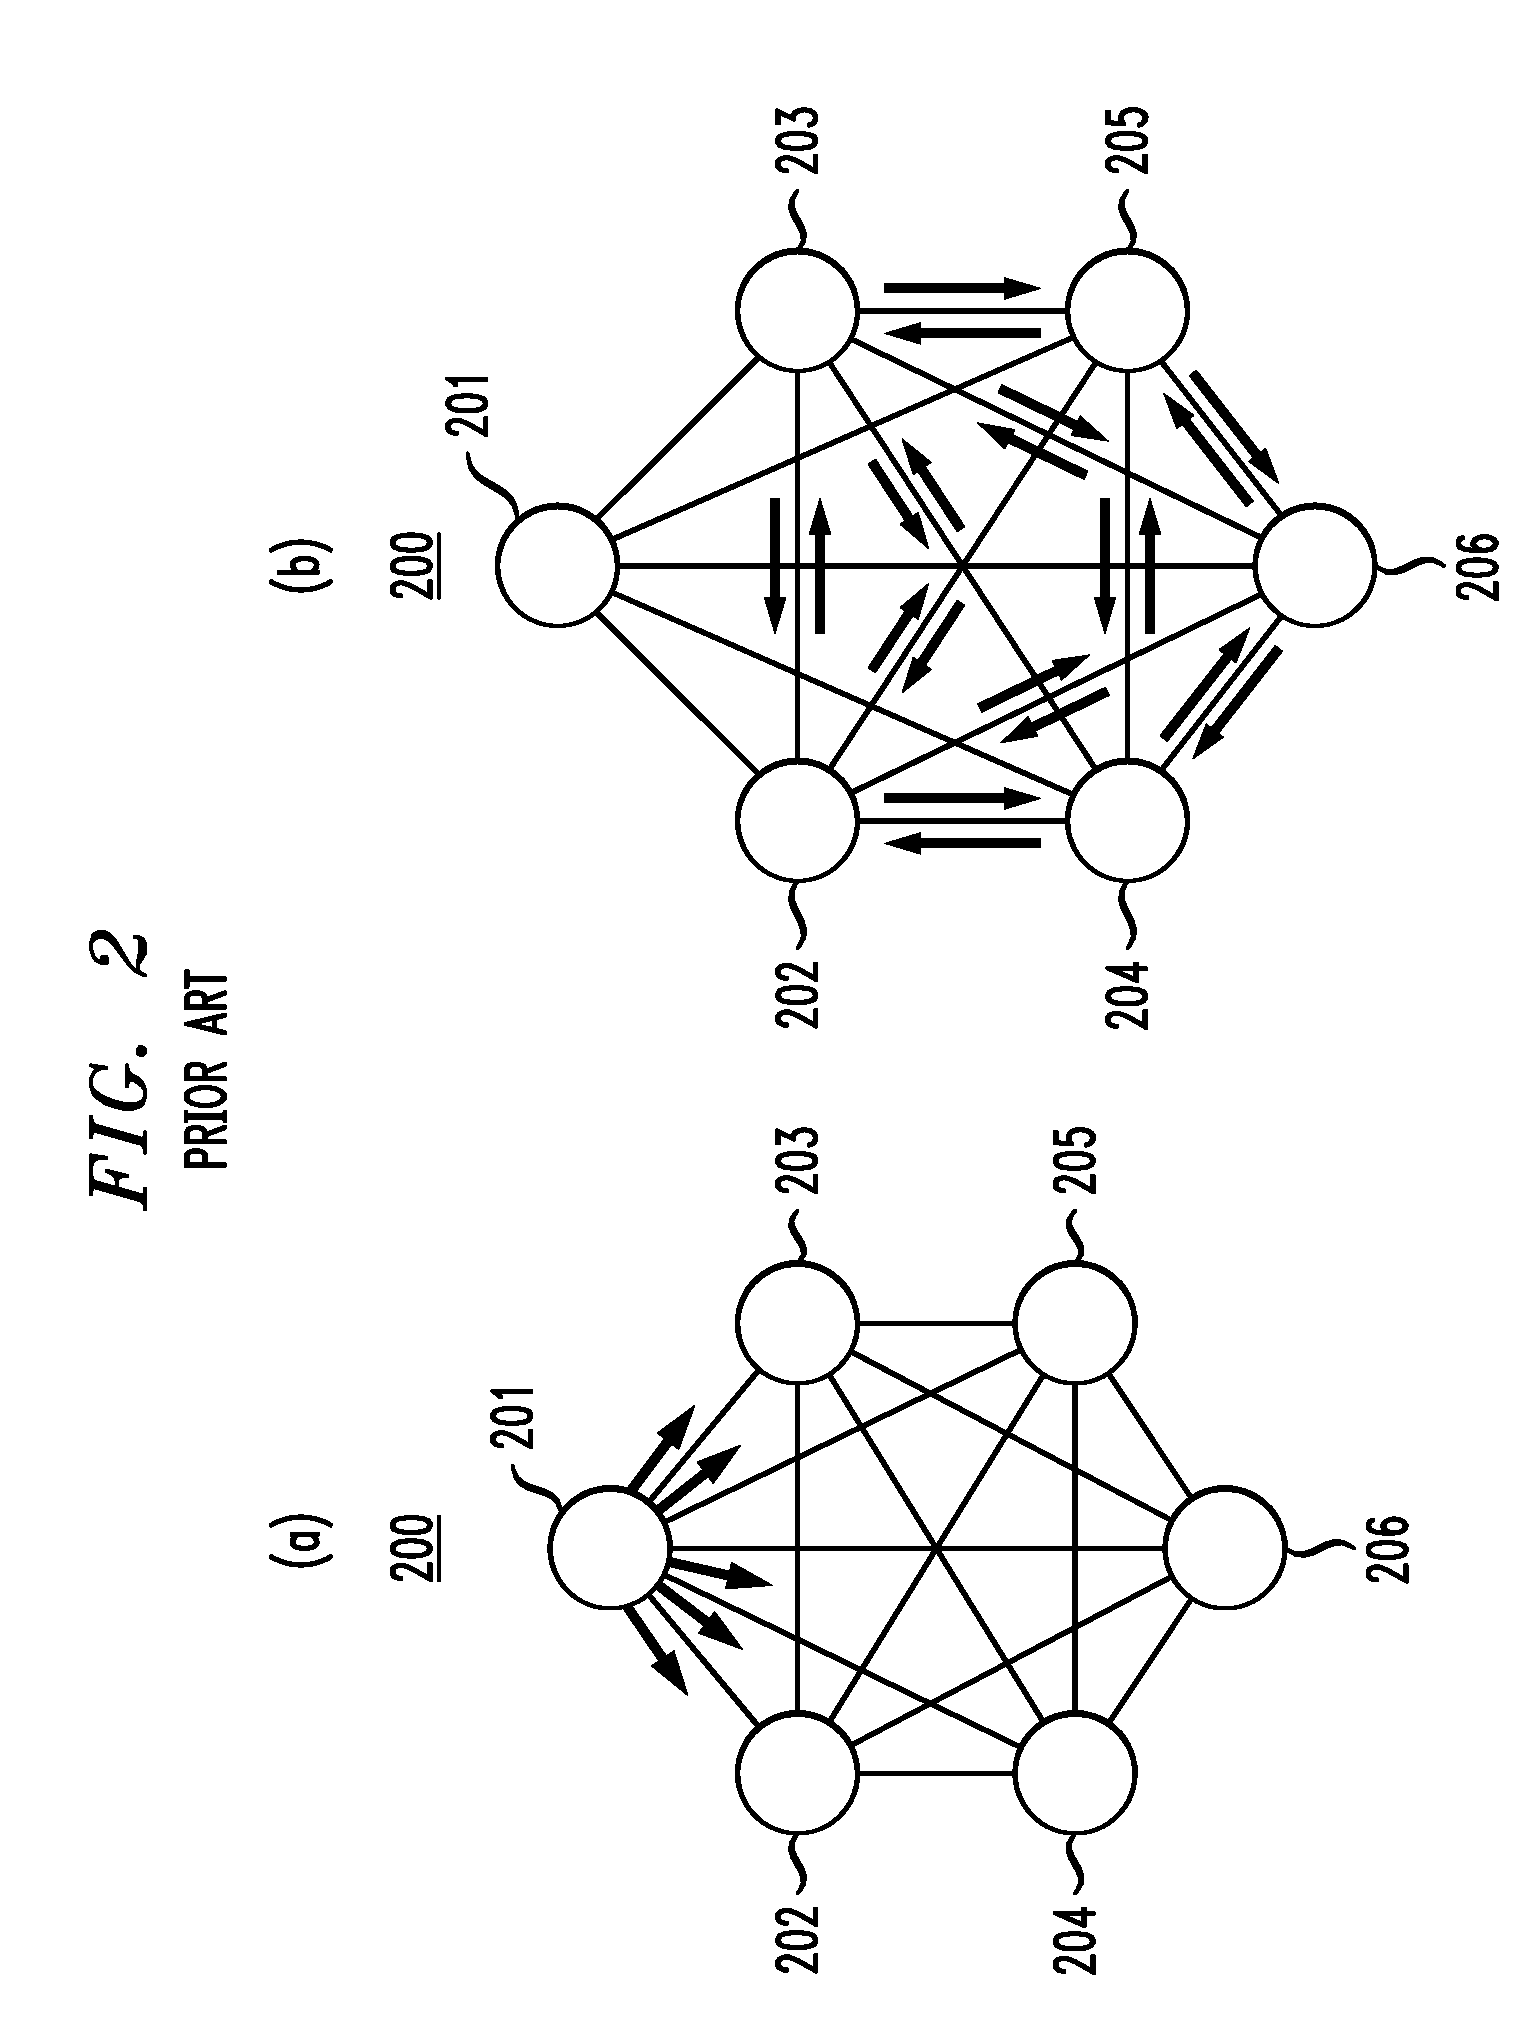 Automatic maintenance of a distributed source tree (DST) network